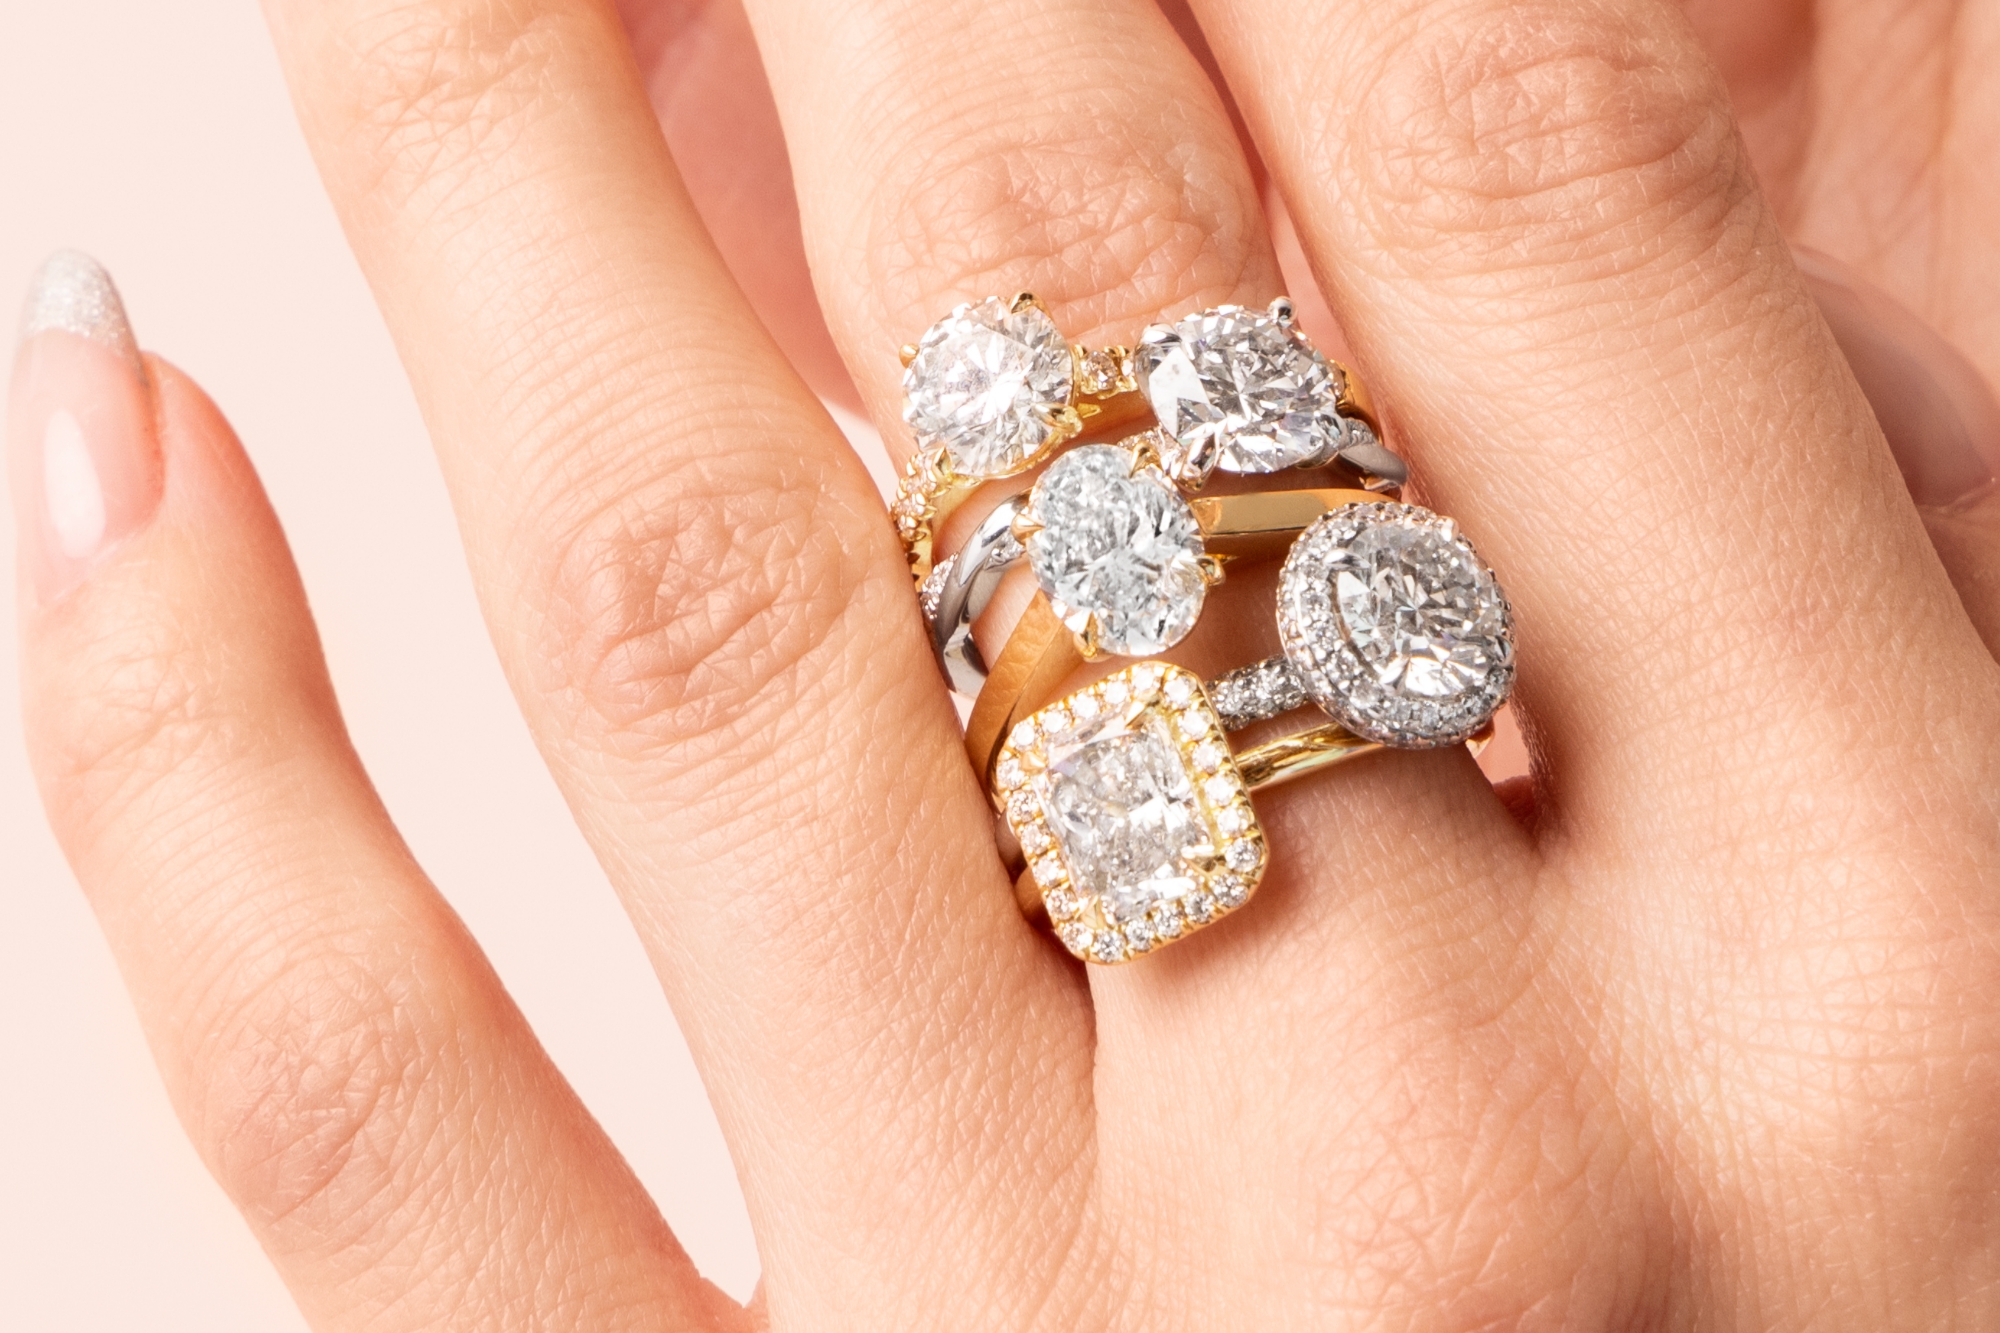 Five Best Engagement Ring Designs - The Fashion Tag Blog